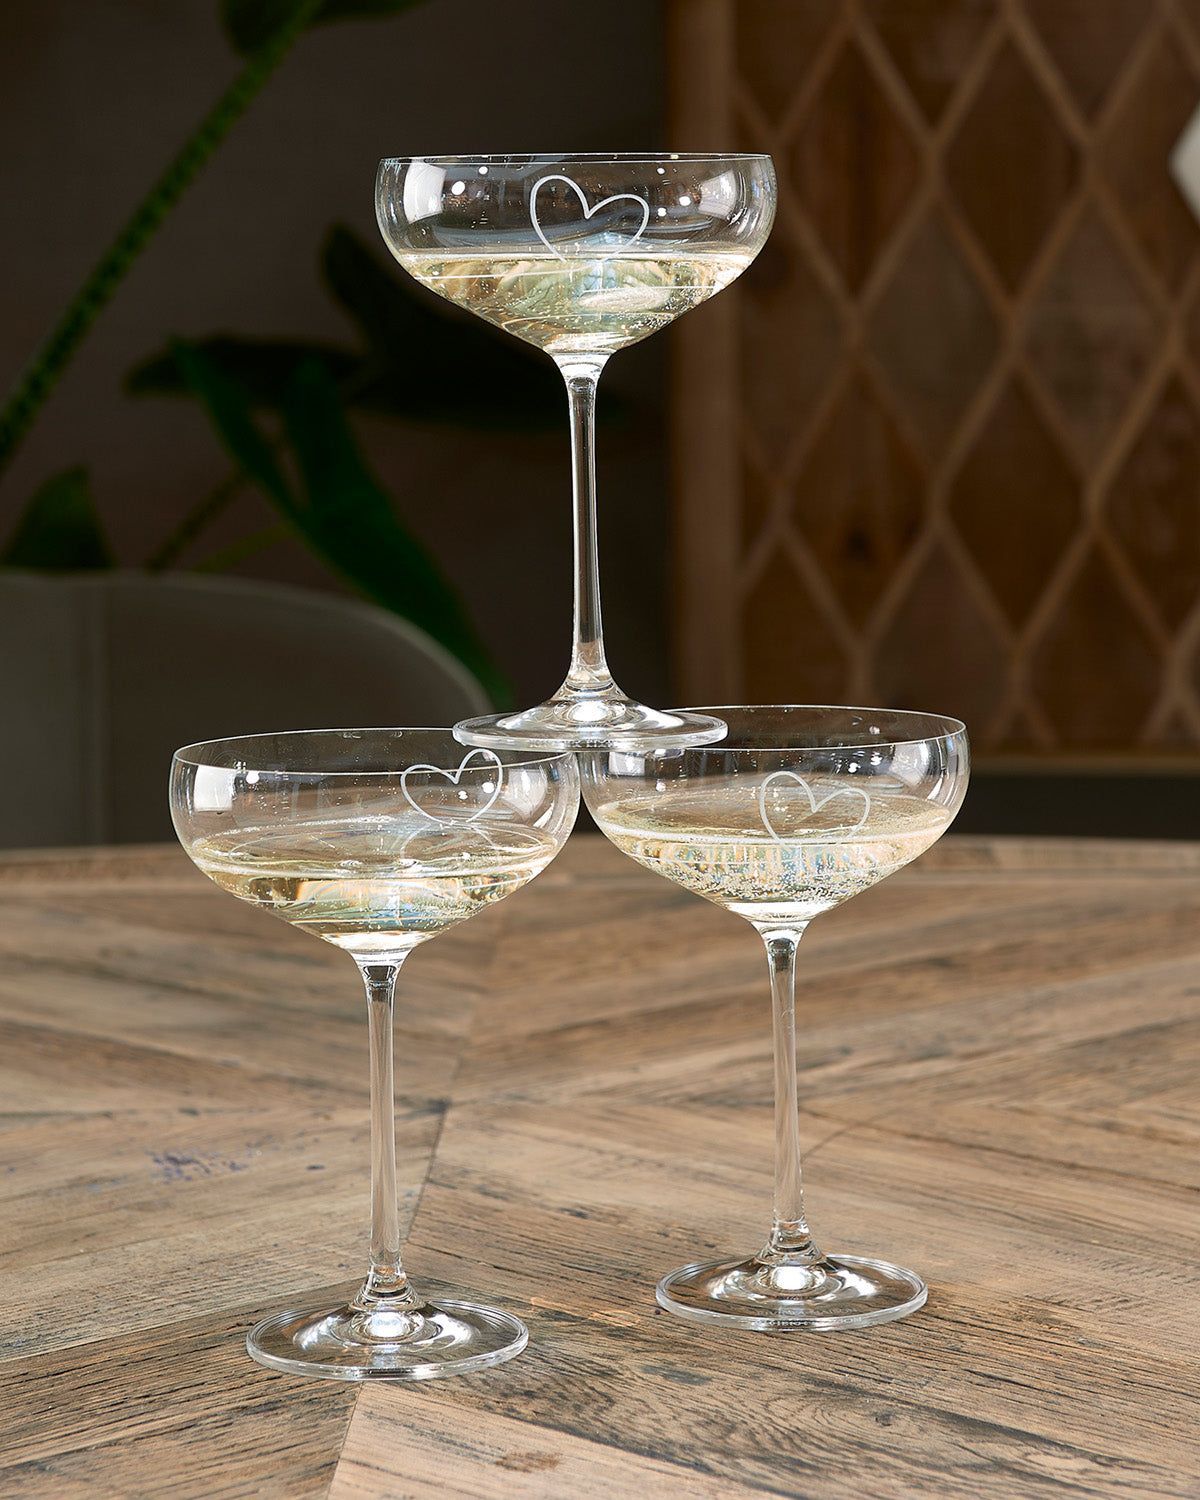 Champagne glasses with hand painted hearts by Riviera Maison